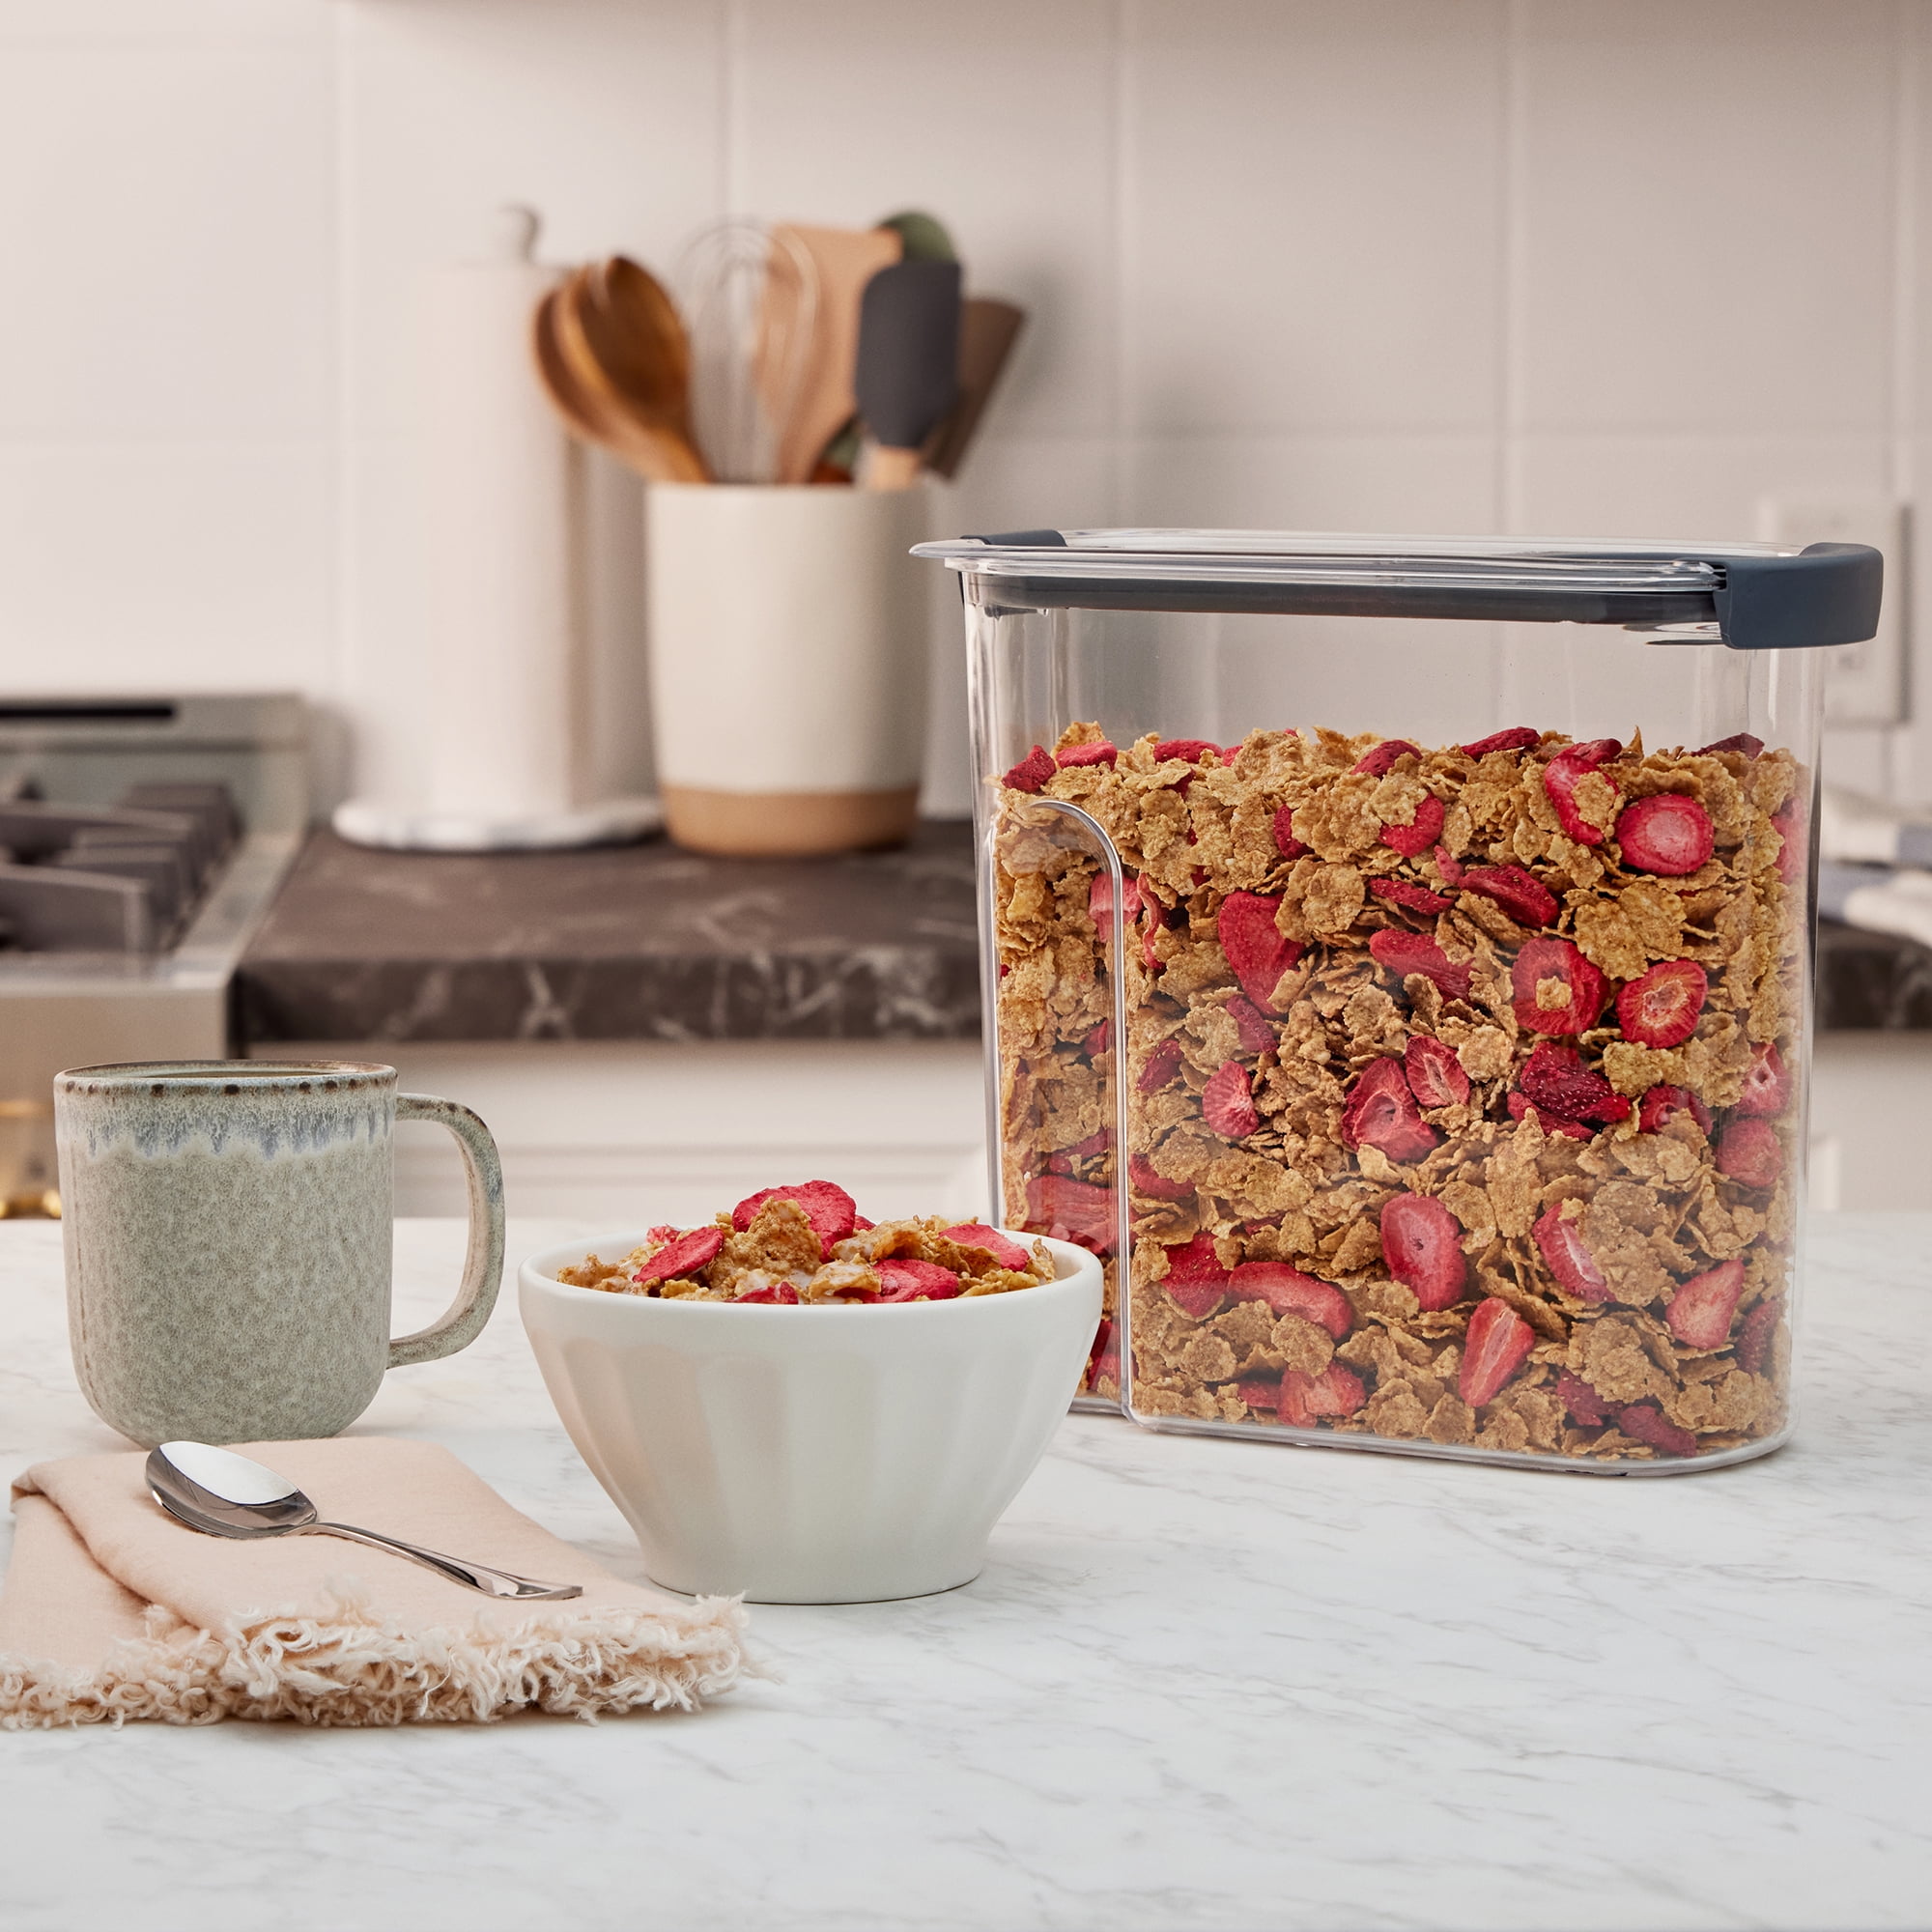 Rubbermaid Brilliance Pantry Cereal - Shop Food Storage at H-E-B